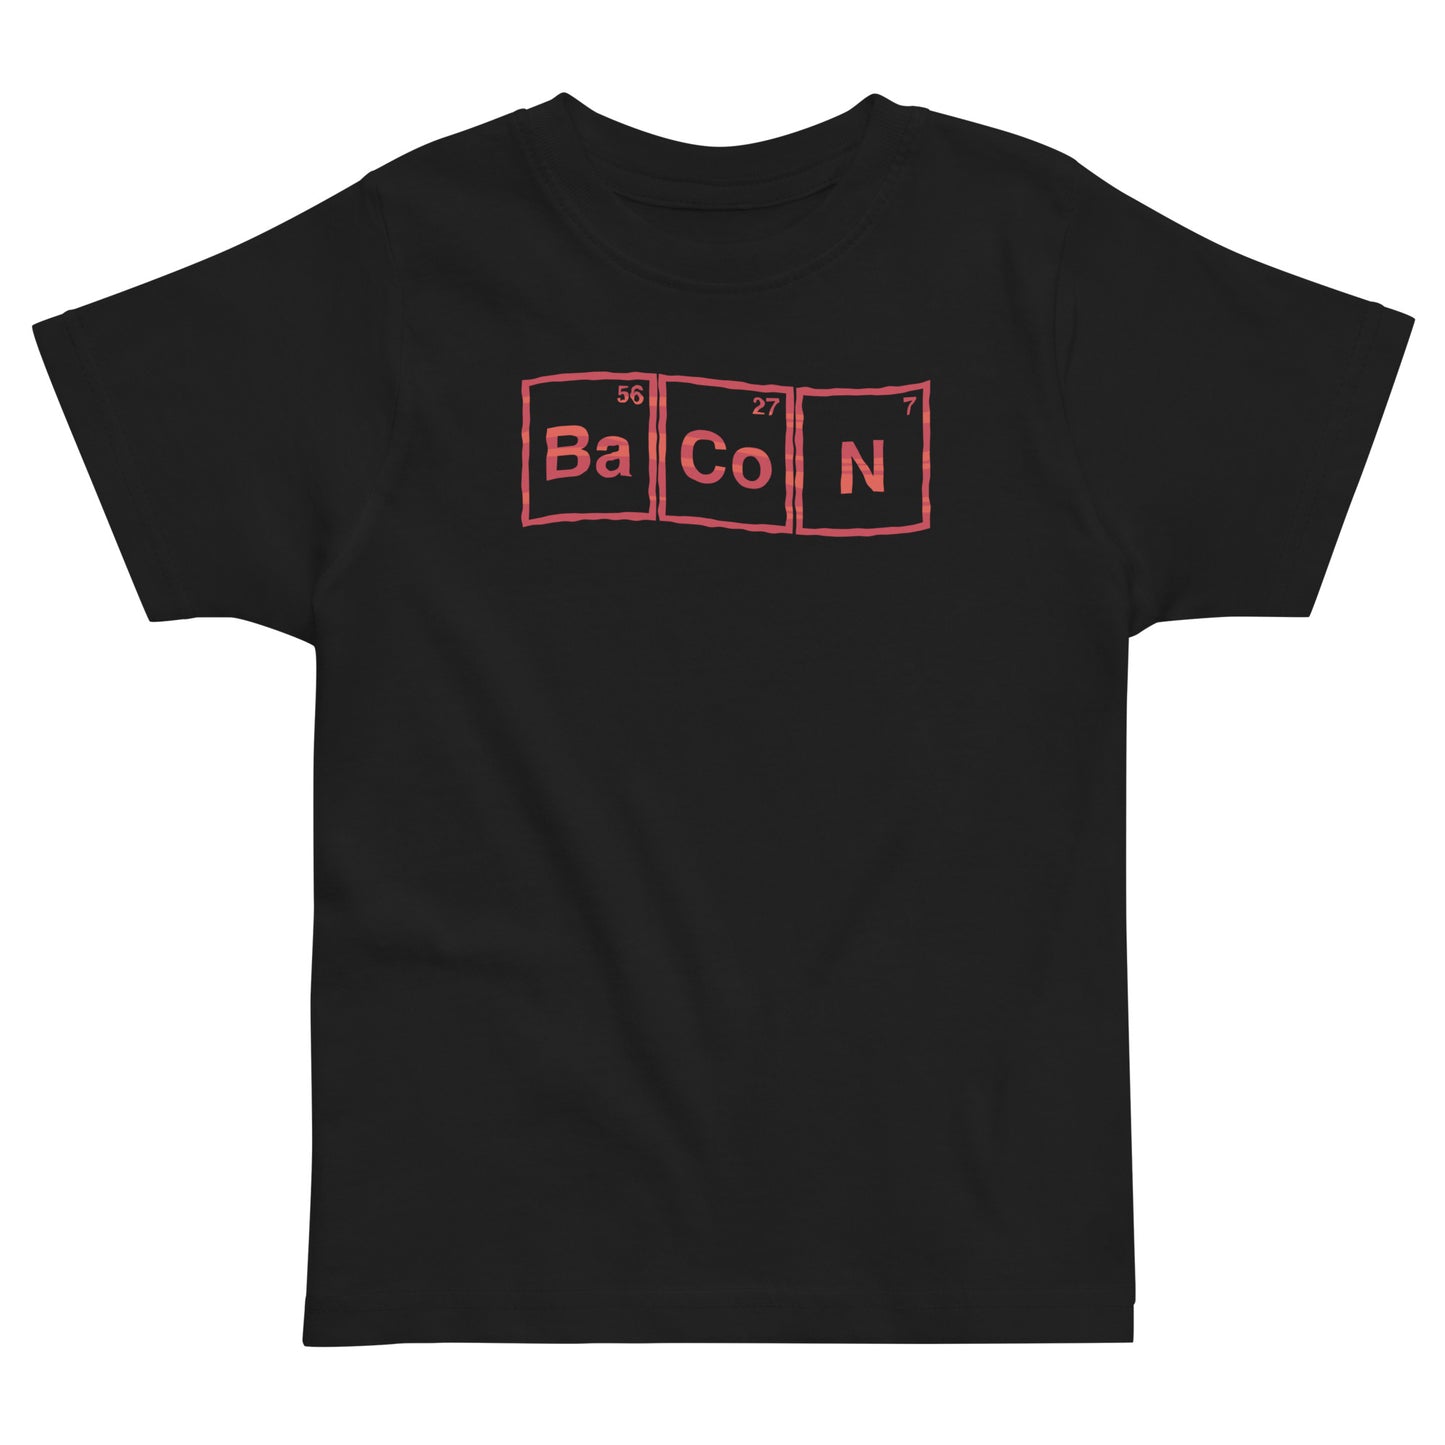 Bacon Compound Kid's Toddler Tee